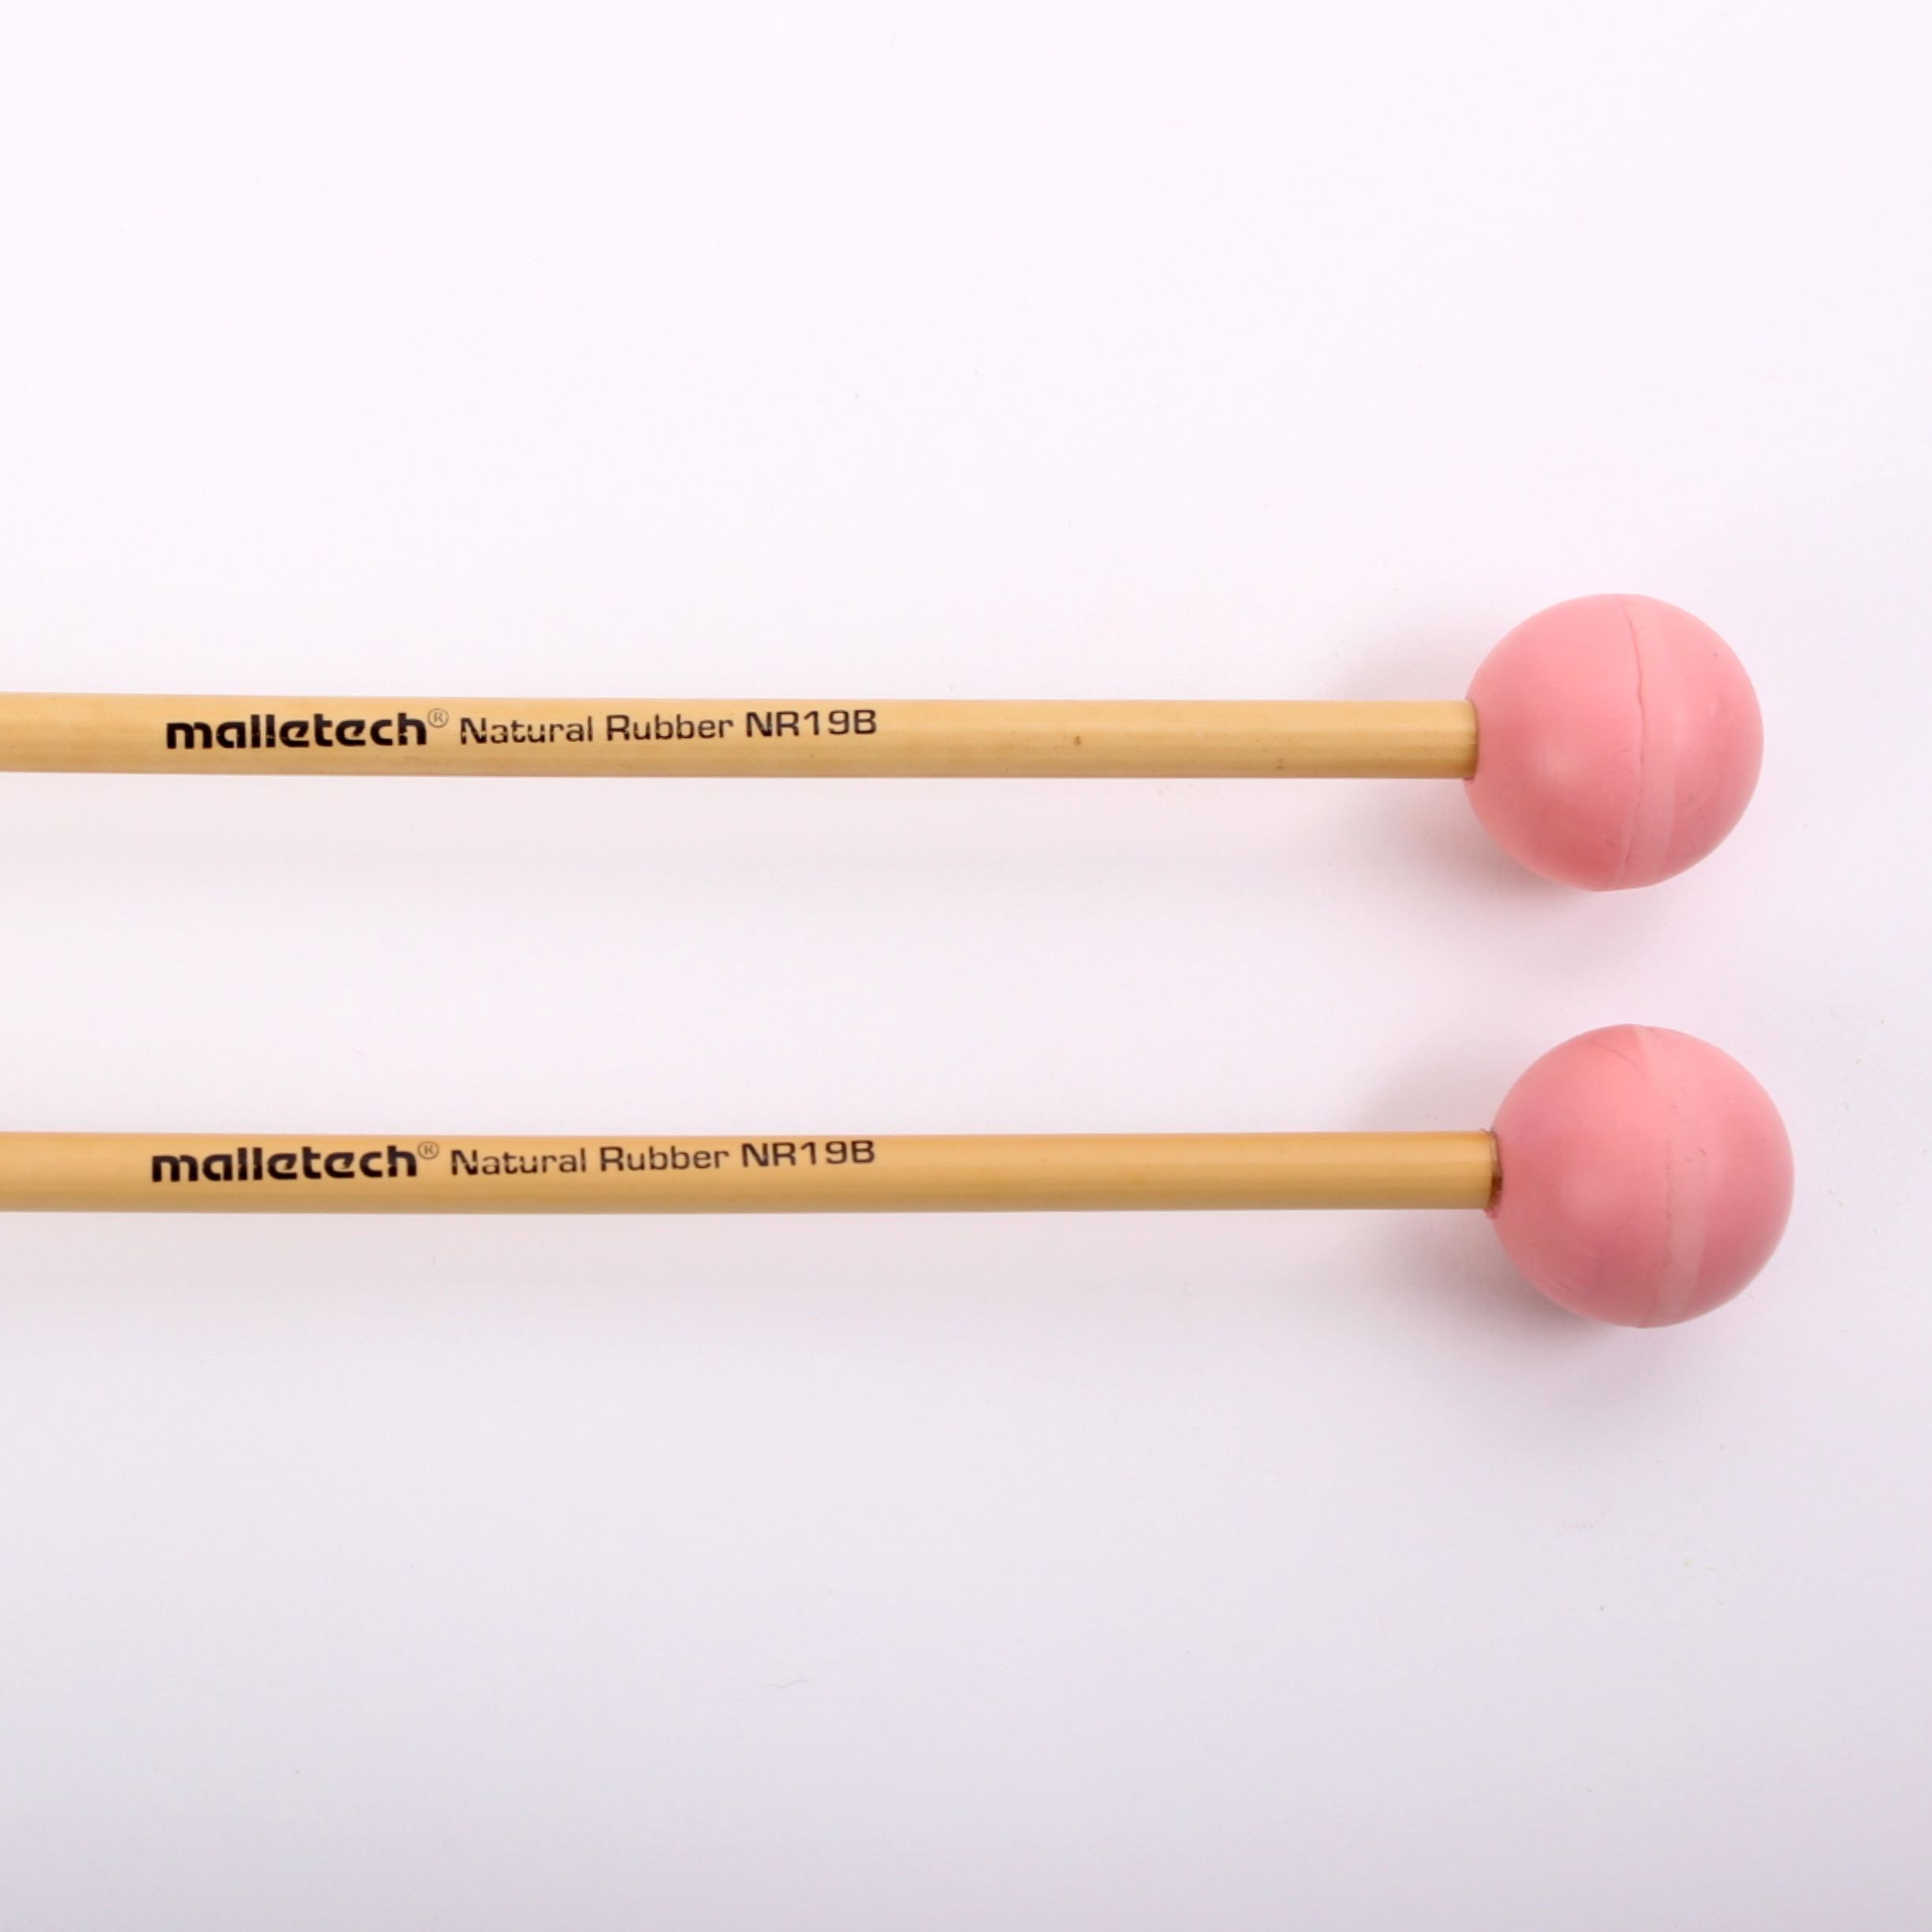 Malletech NR19 Natural Rubber Hard Xylo/Bell Mallets